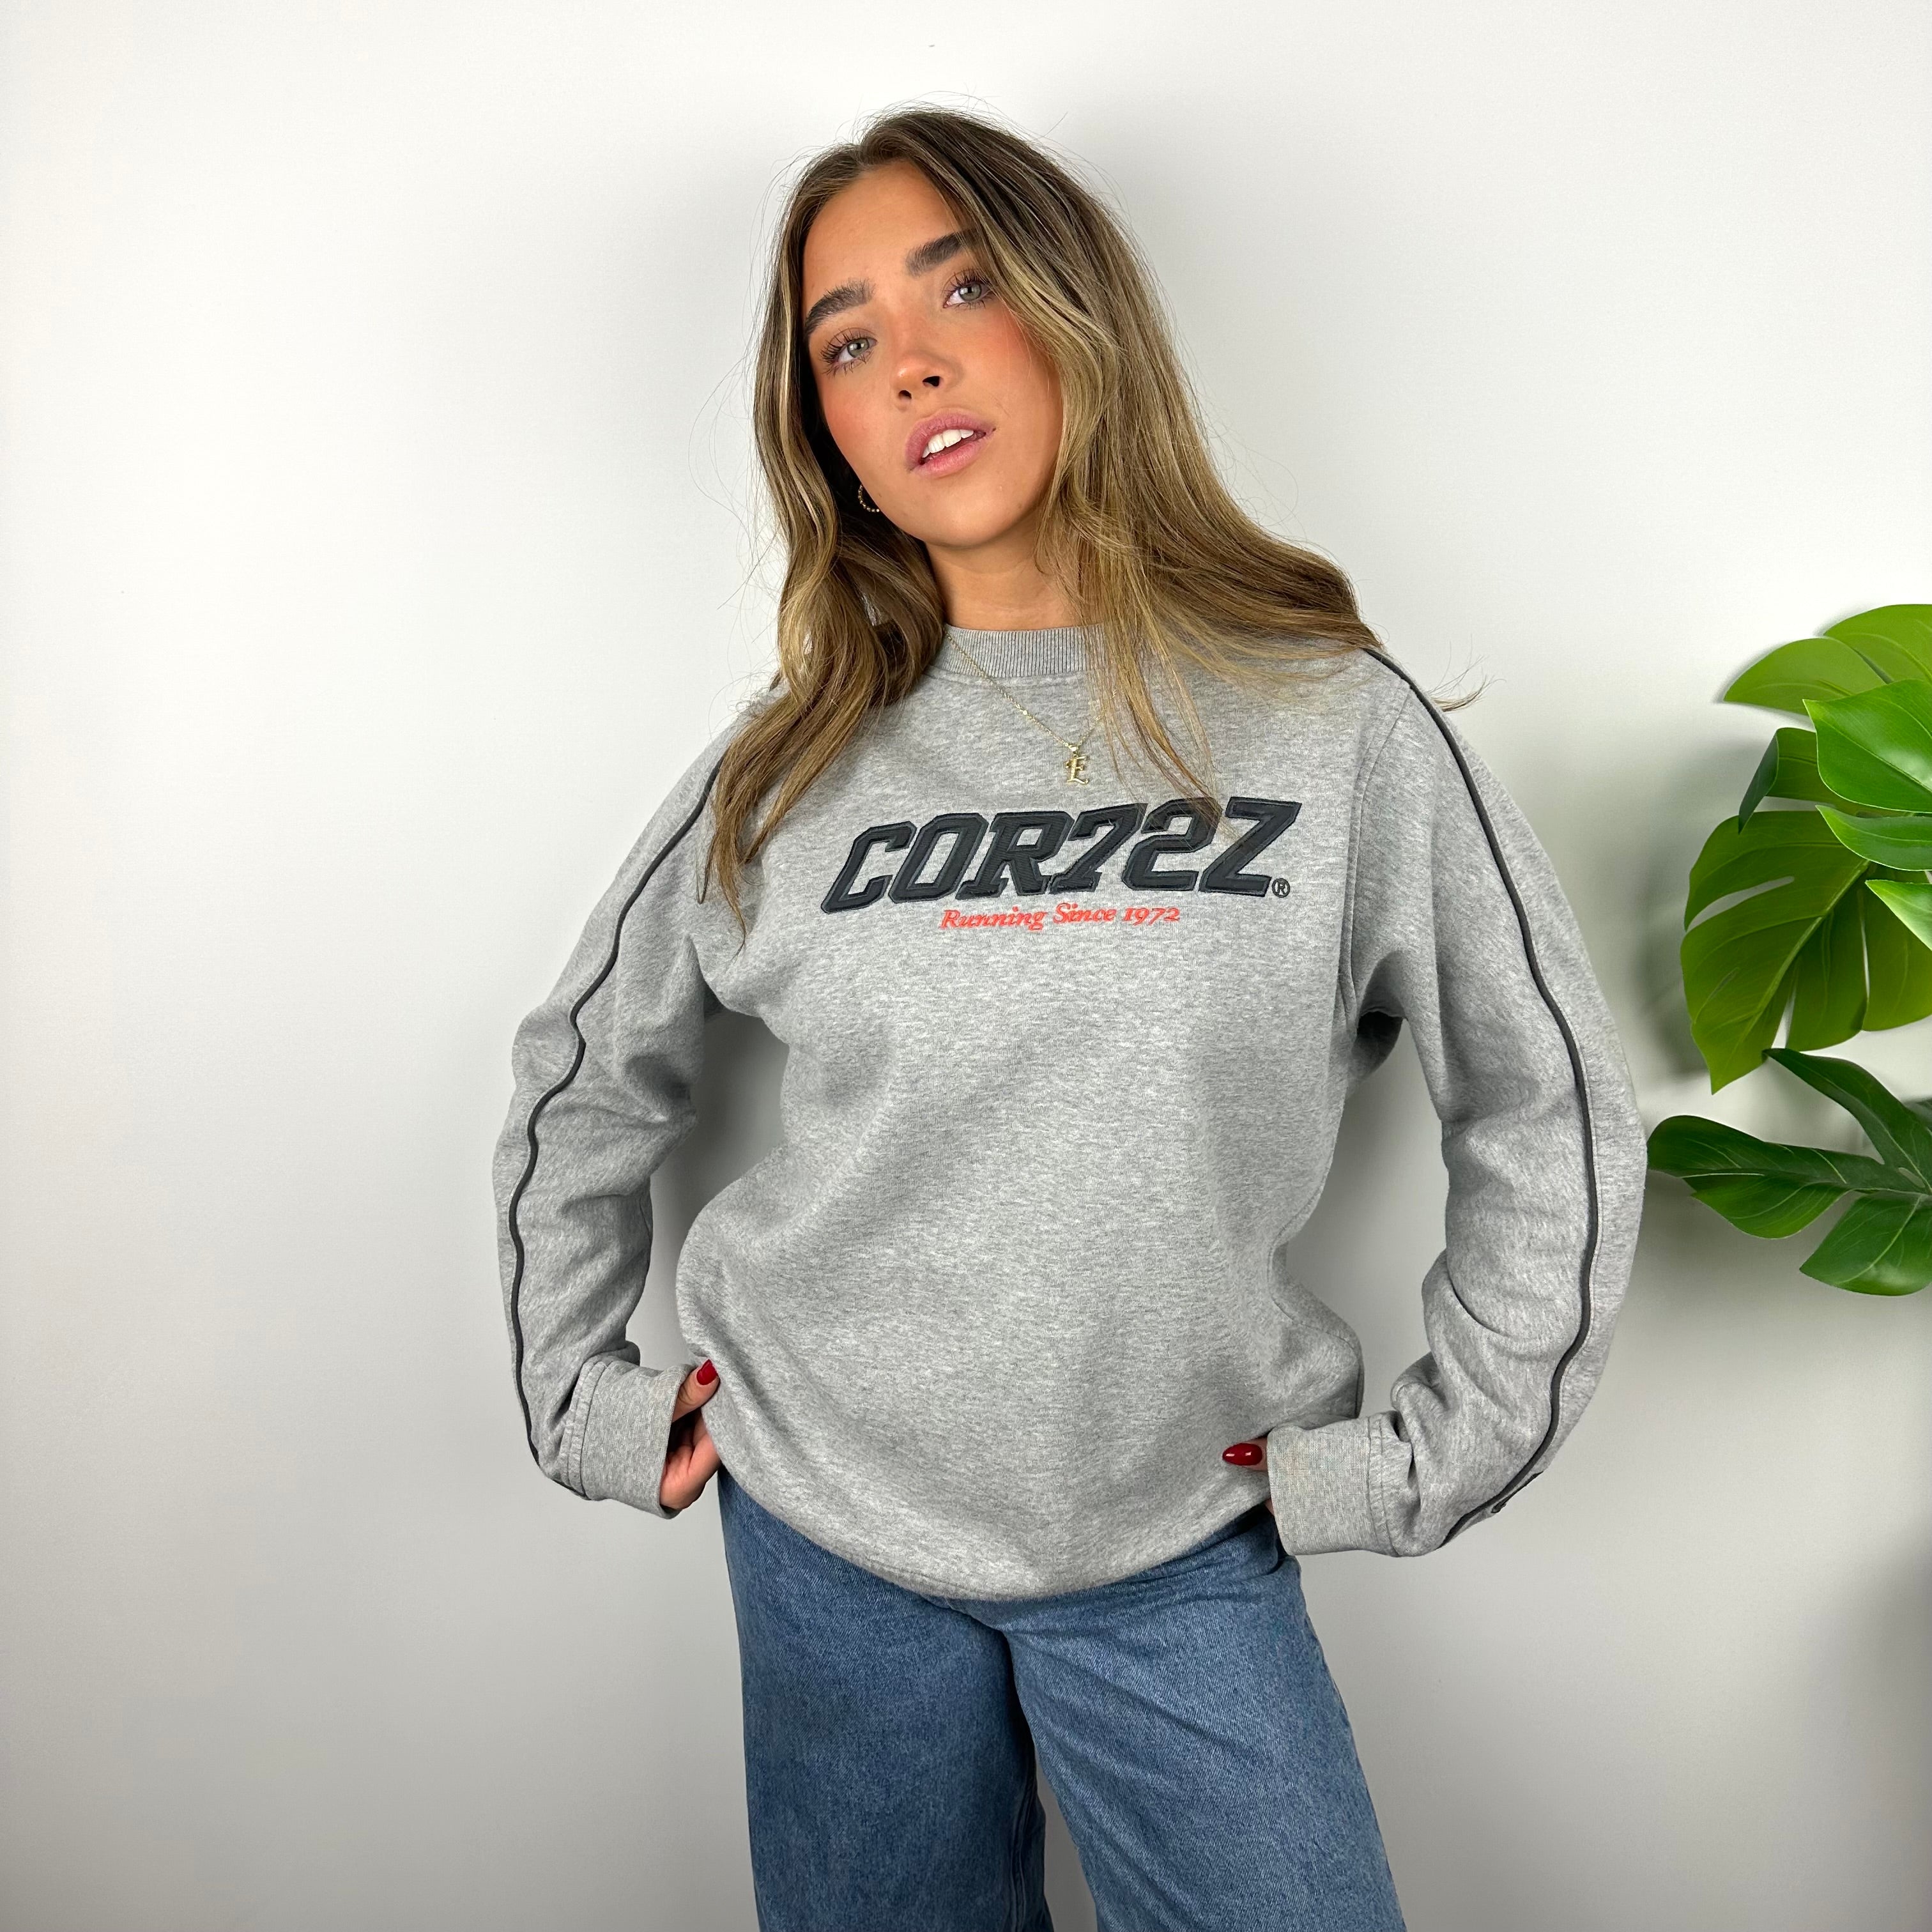 Nike Cortez Grey Embroidered Spell Out Sweatshirt (S)